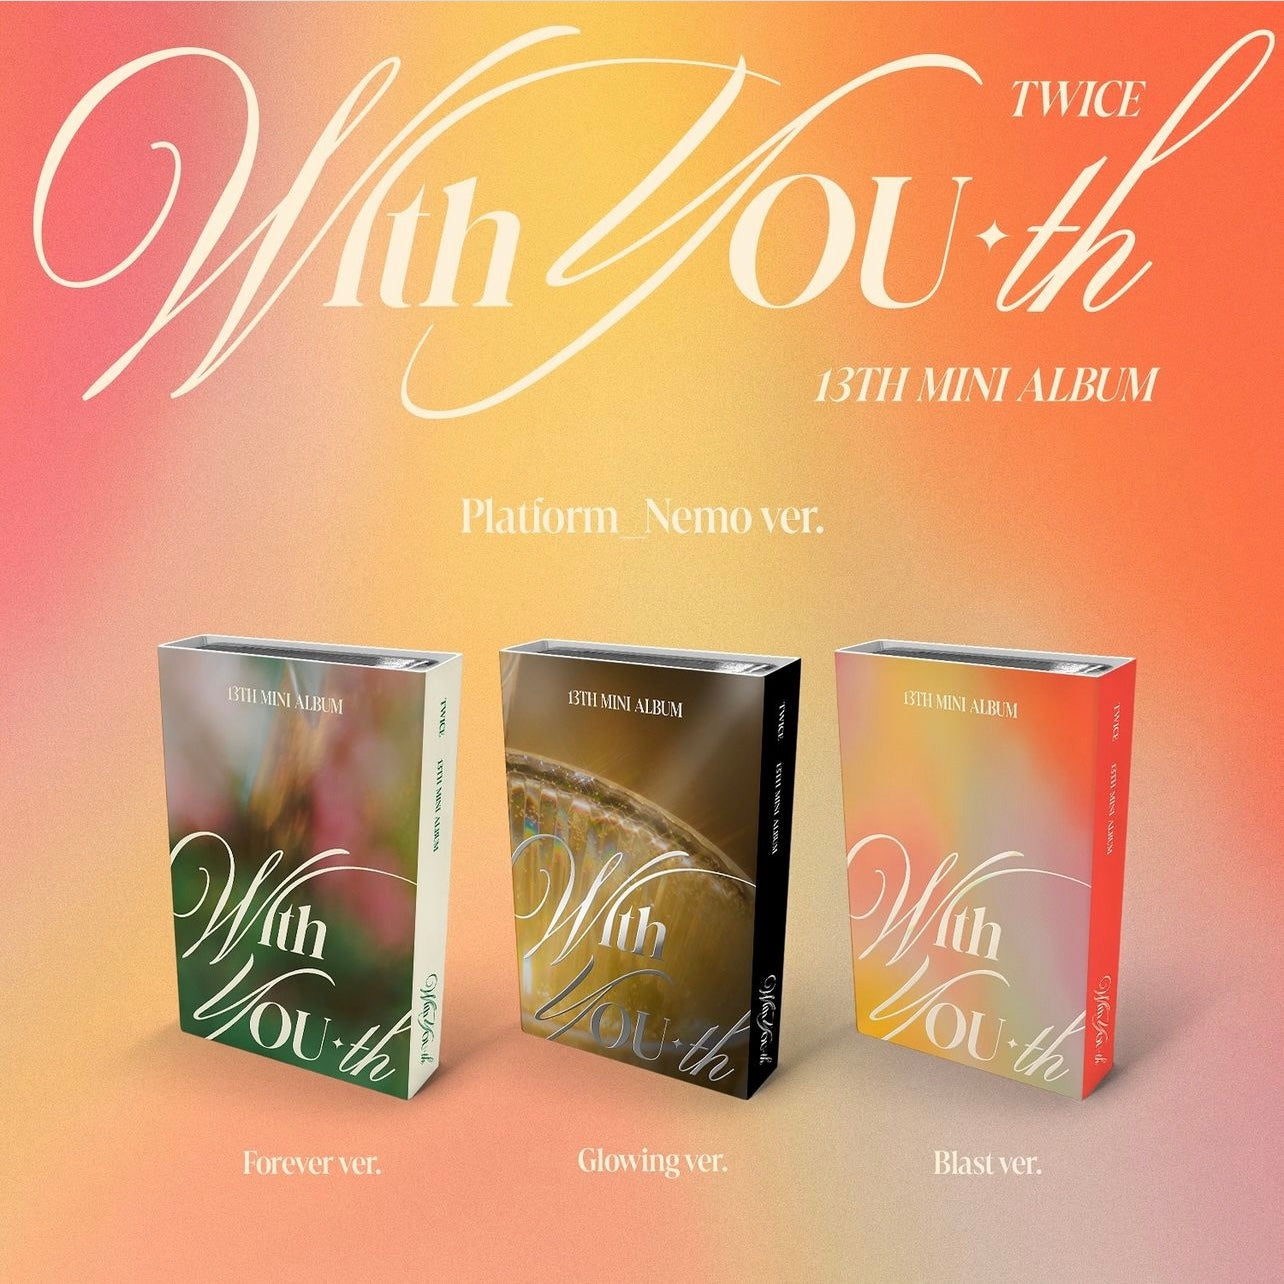 (PRE ORDER) TWICE - WITH YOU-TH (Nemo Ver.)